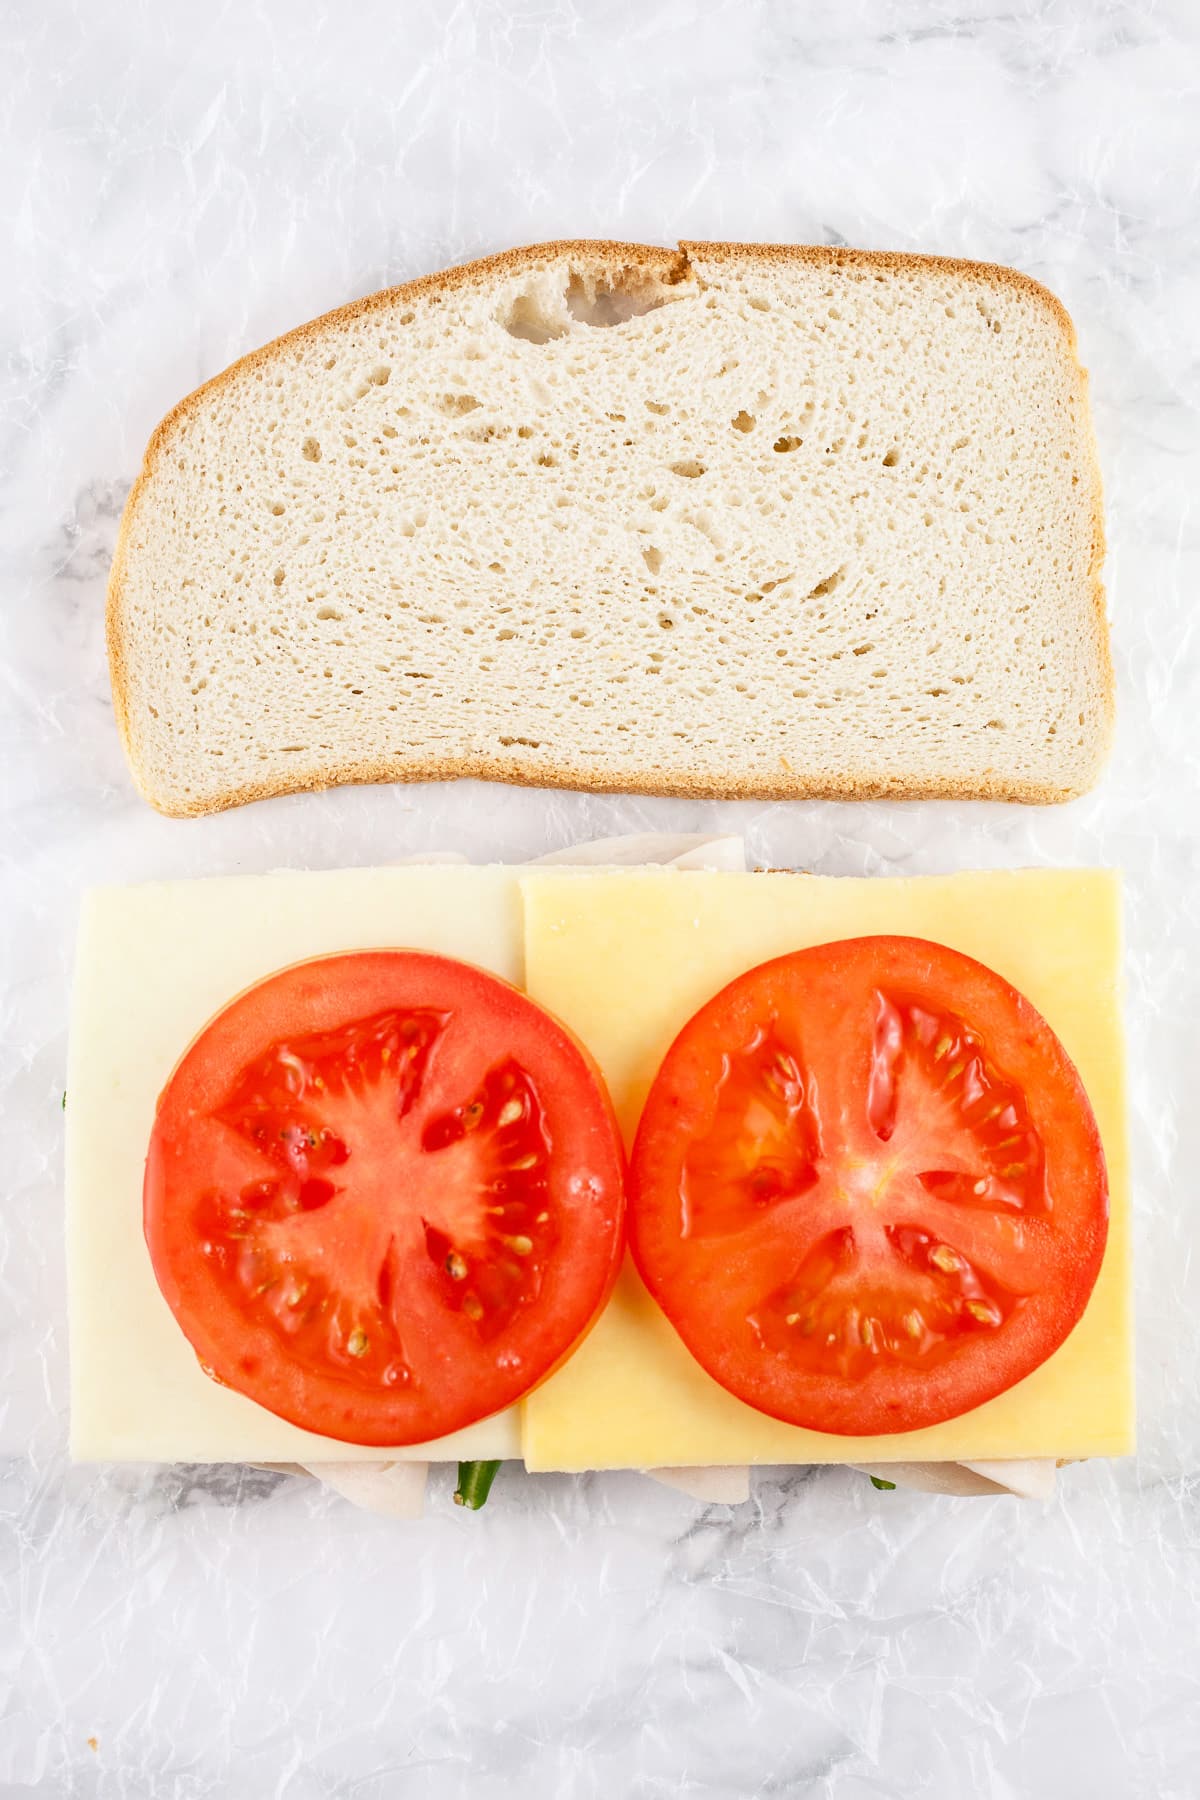 Sliced bread with cheese and tomatoes.